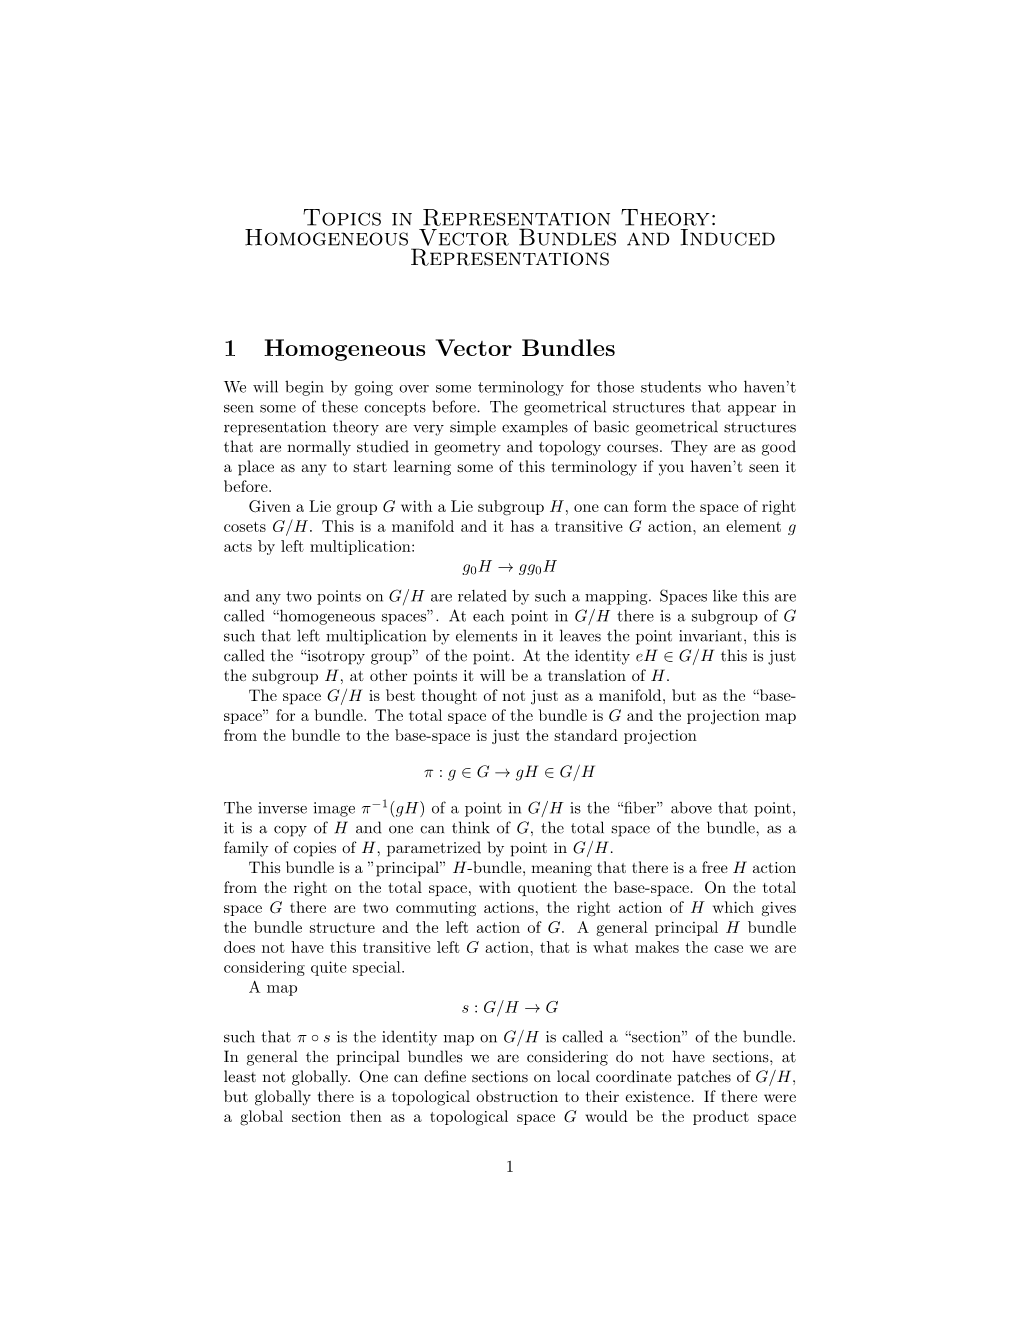 Homogeneous Vector Bundles and Induced Representations